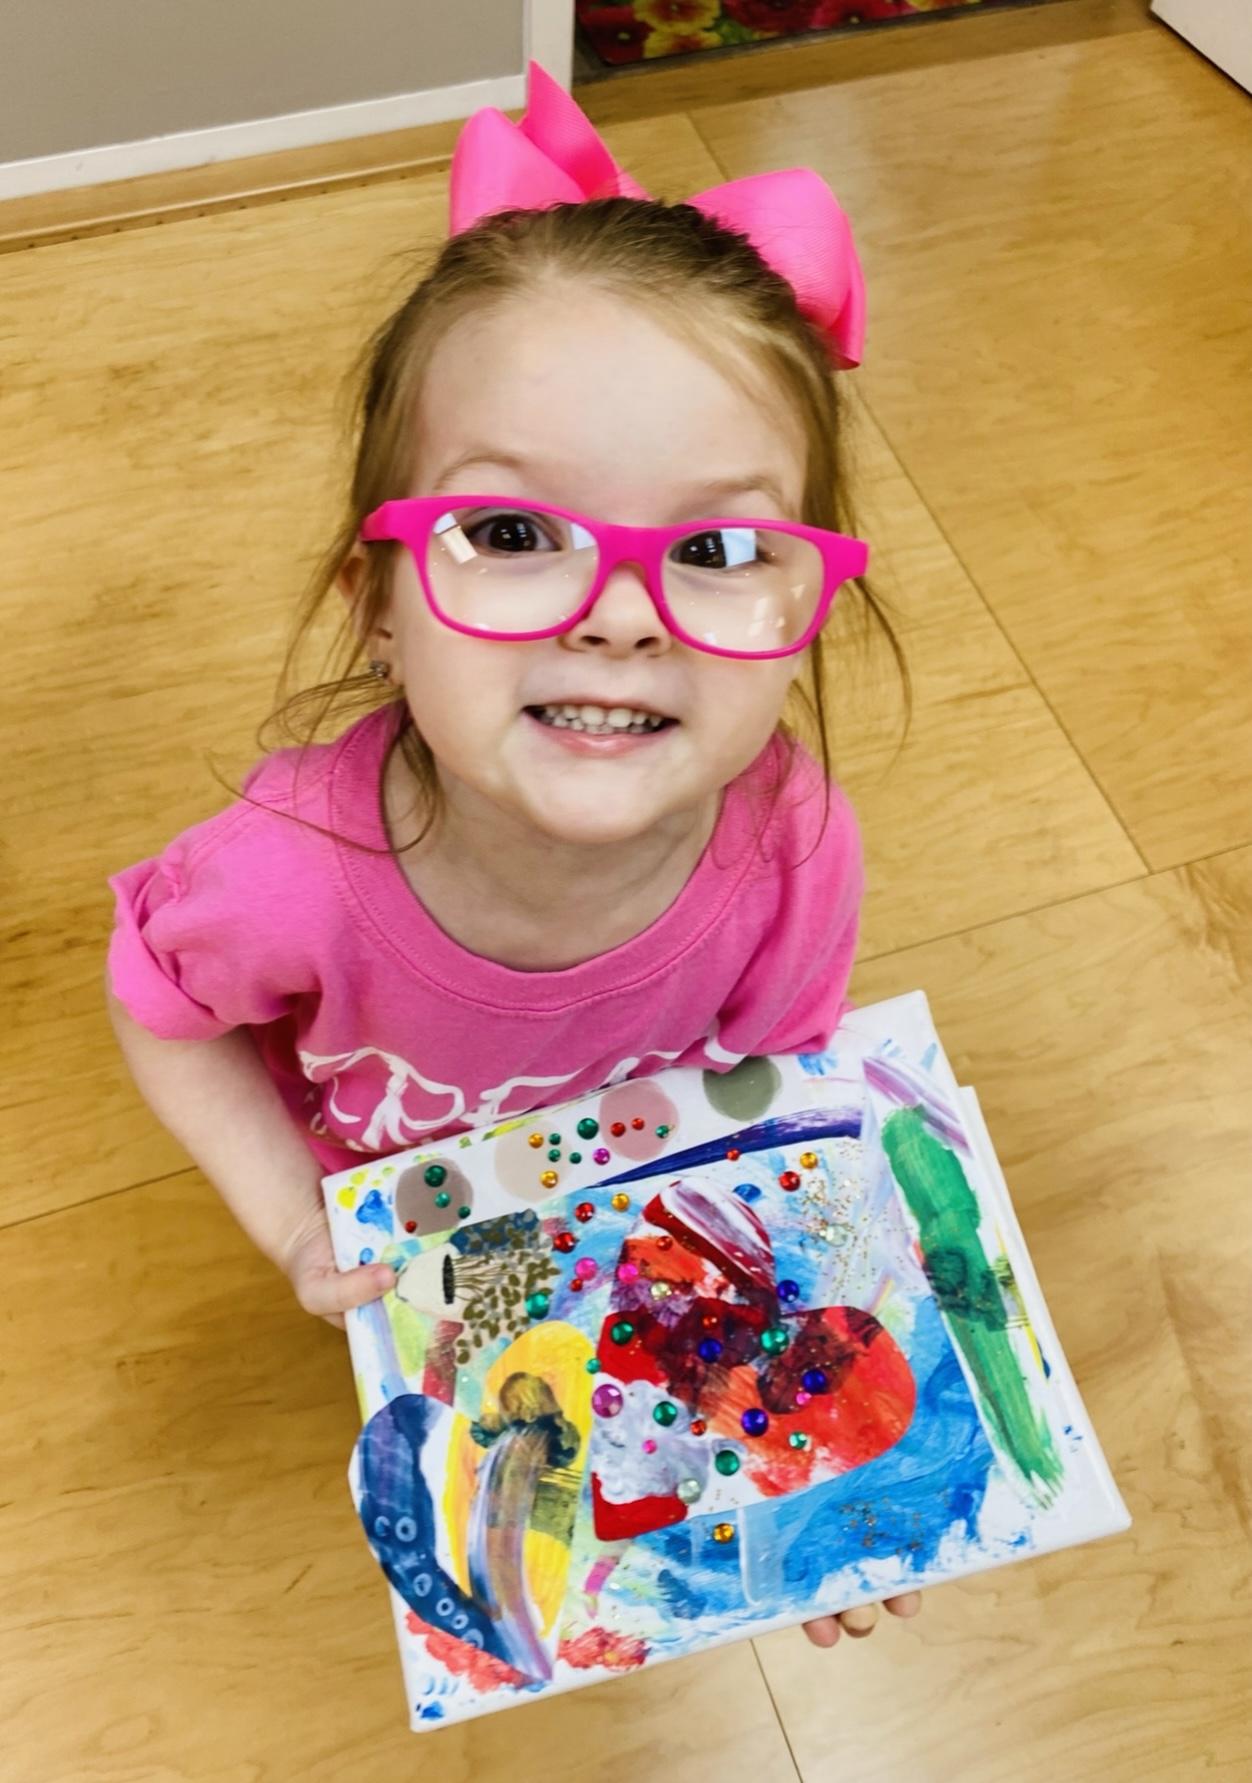 MINI-create Lyrical Dance & Watercolor Painting (Ages 4-5)